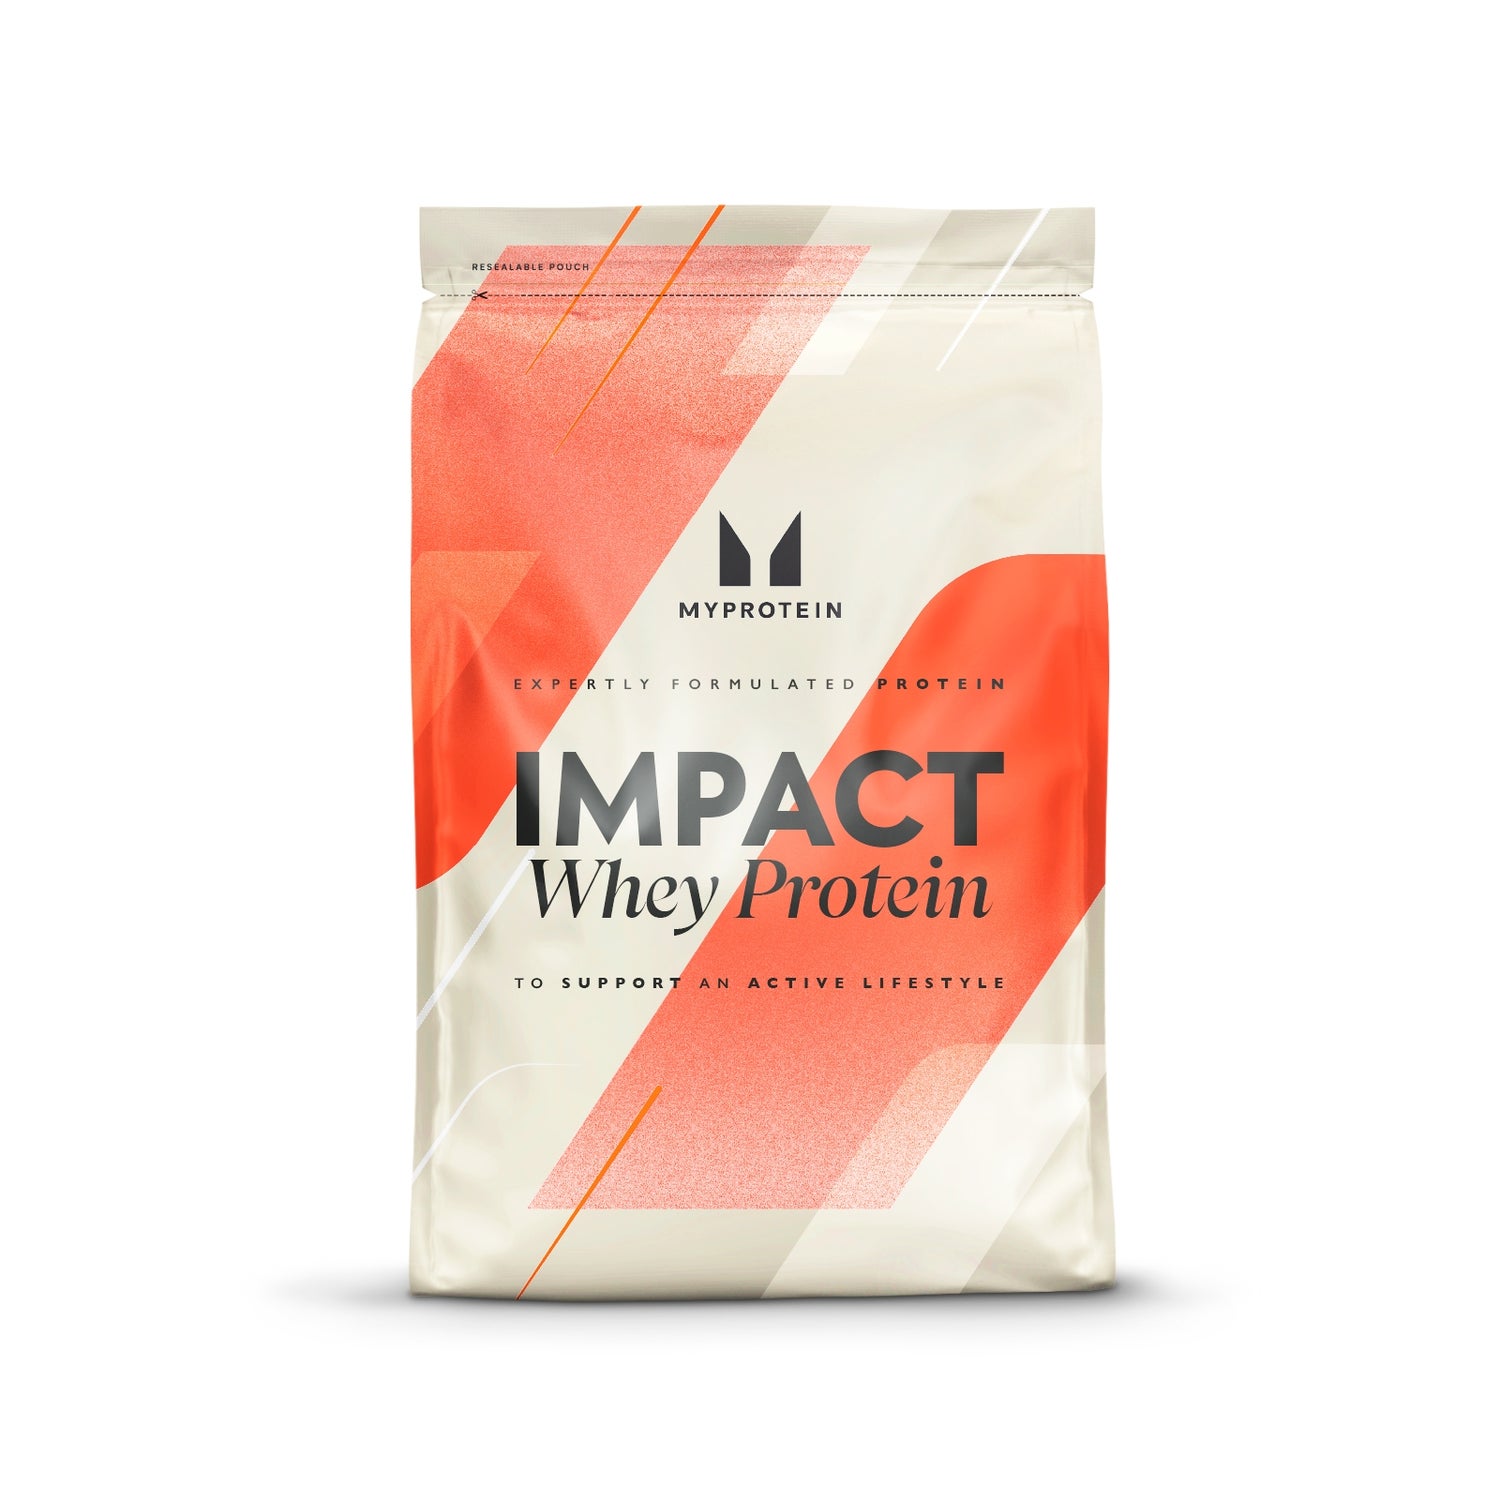 Myprotein Impact Whey Protein (Limited Edition)